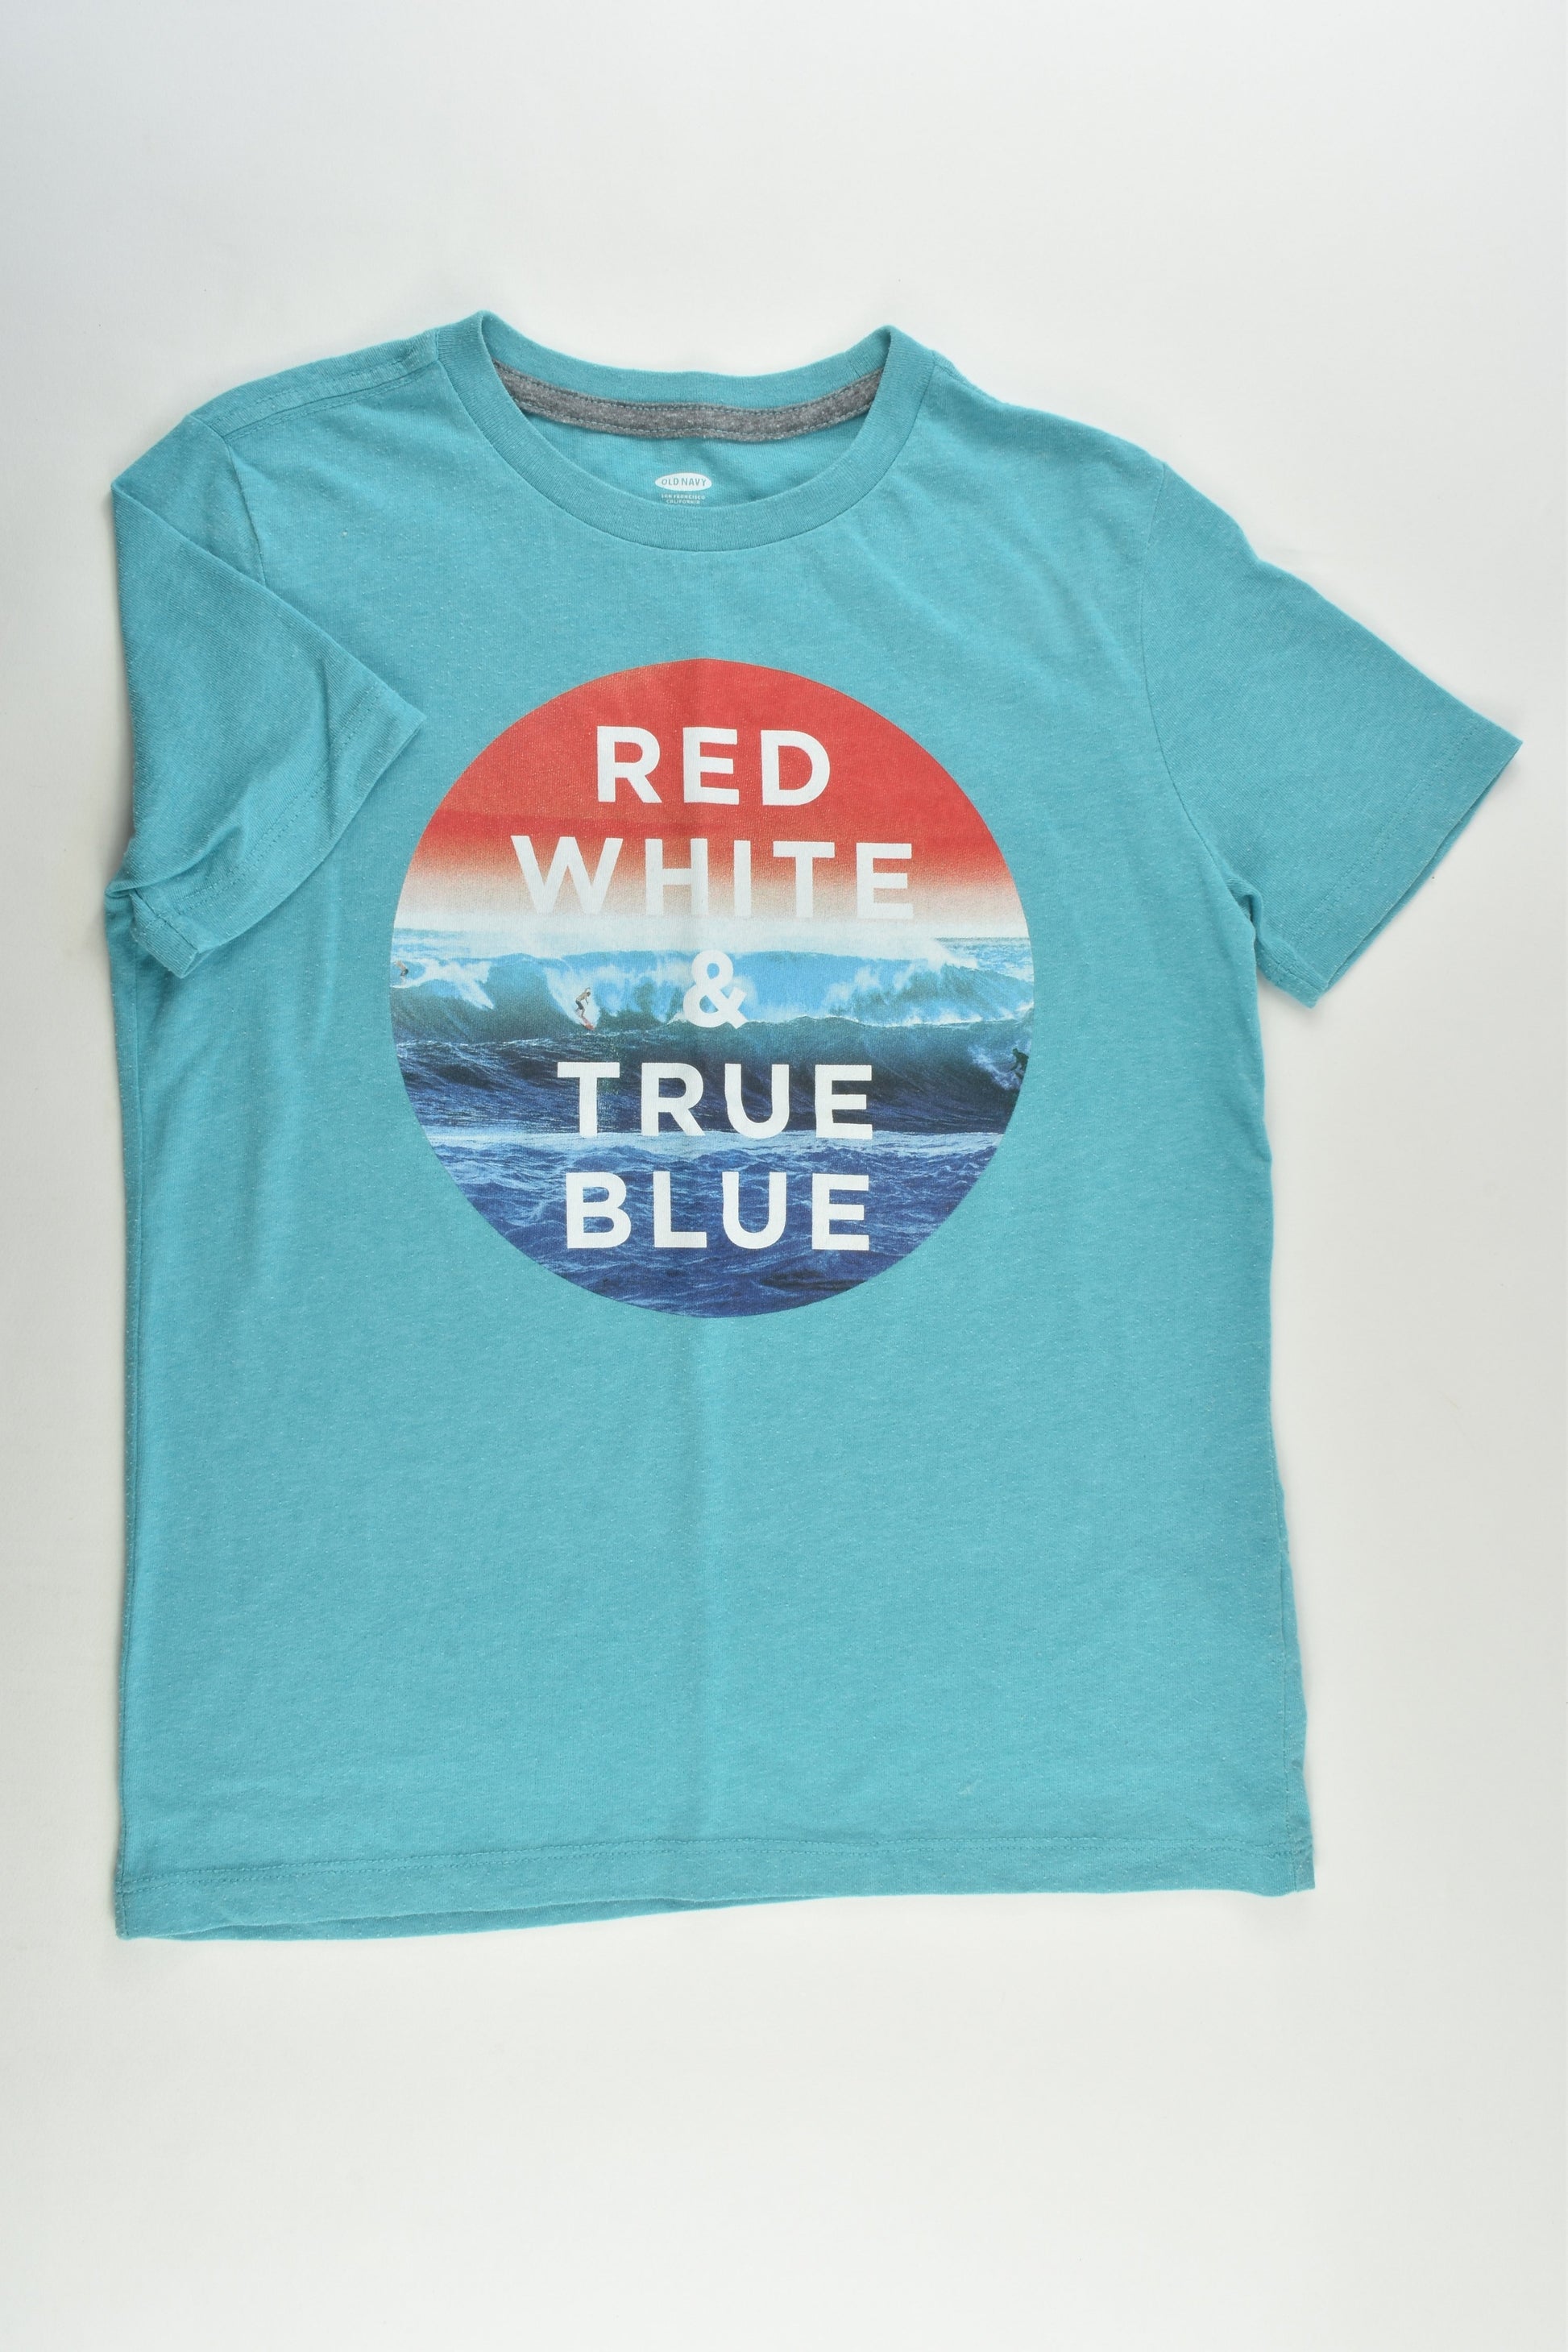 Old Navy Size 8 (M) 'Red White and True Blue' T-shirt